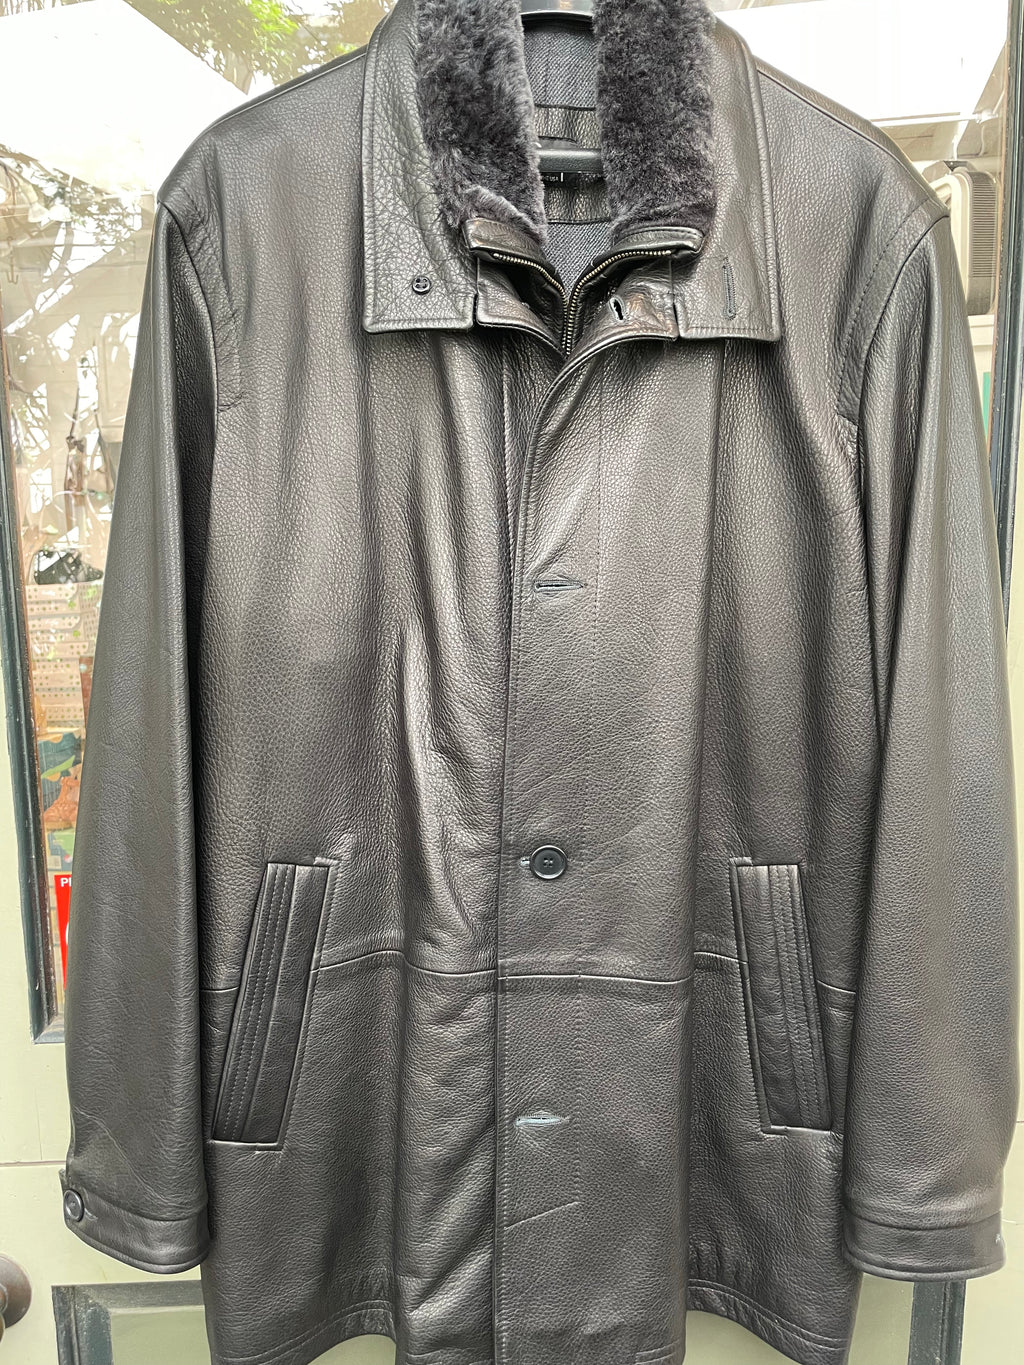 Men's Black Hunter Shearling Car Coat with Mocha Leather Accents